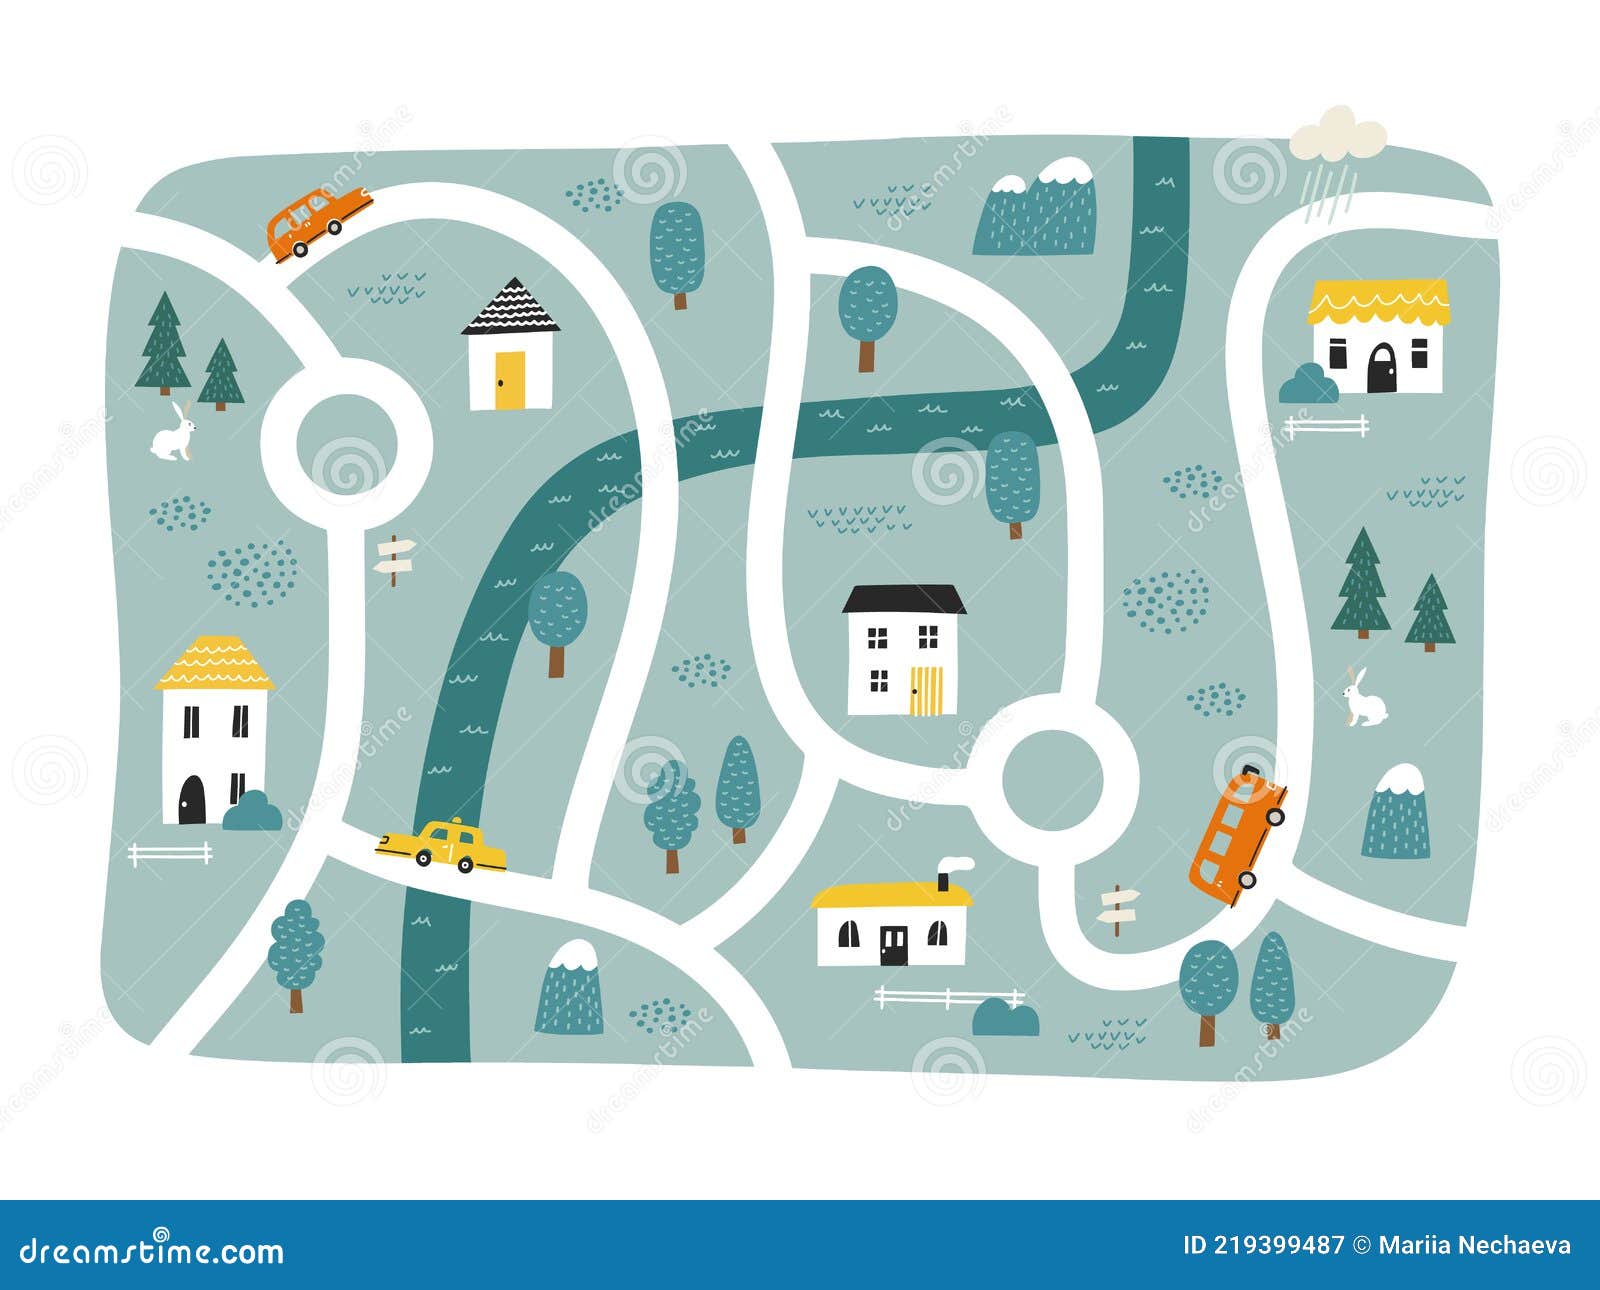 Cute Town Map for Kid S Room. Hand Drawn Vector Illustration of a City or  Village with Roads, Streets and Cars Stock Vector - Illustration of tree,  concept: 219399487